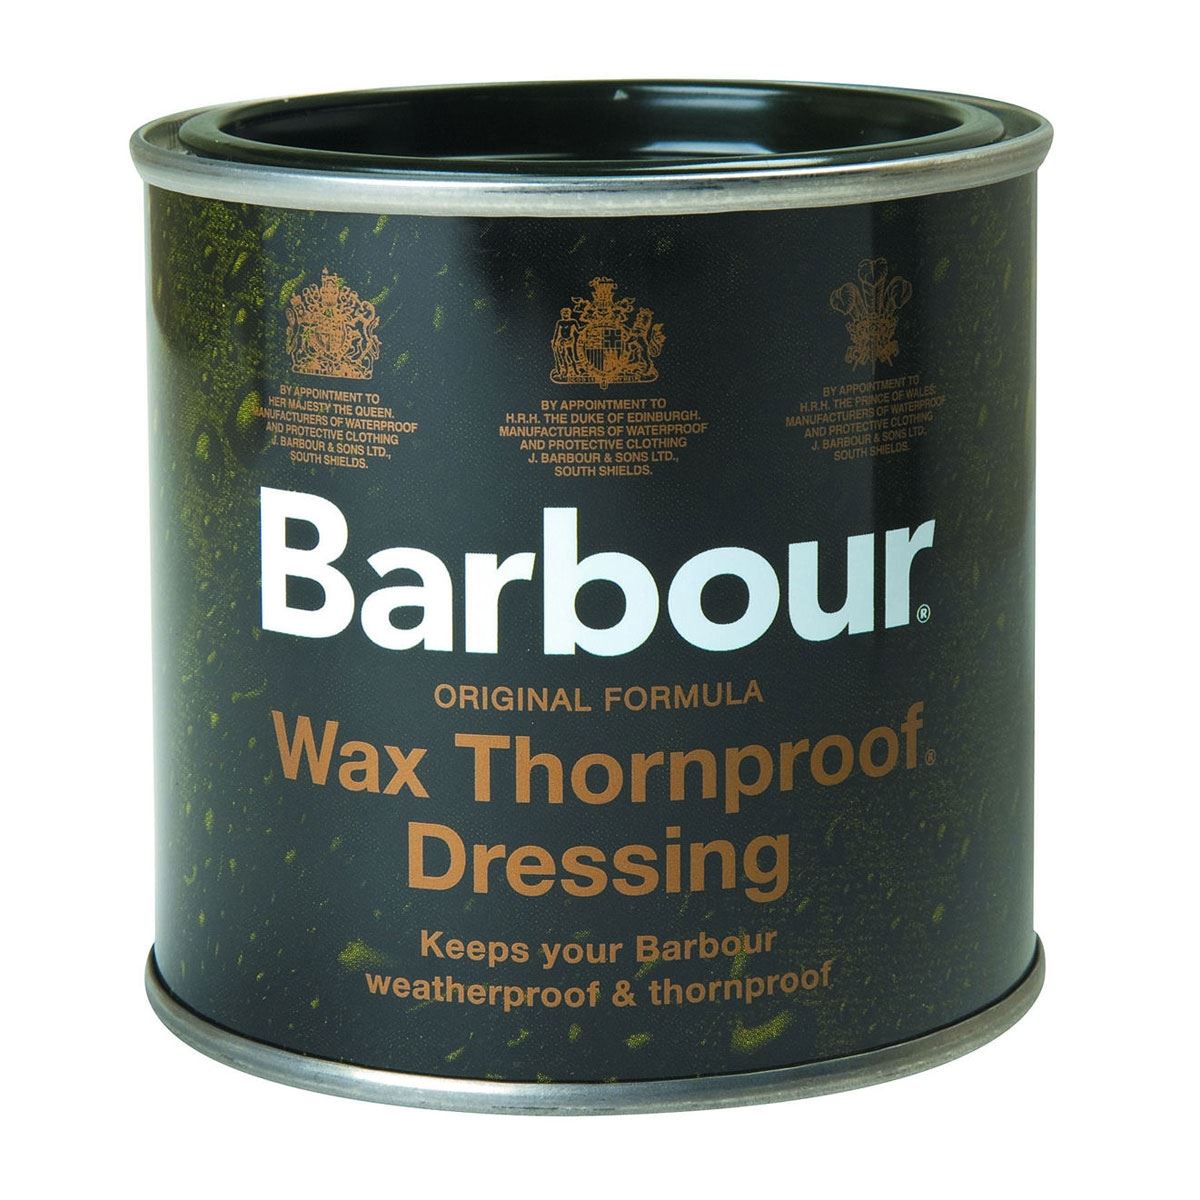 What is the durability of Barbour wax jackets when treated with Barbour Wax Thornproof Dressing?